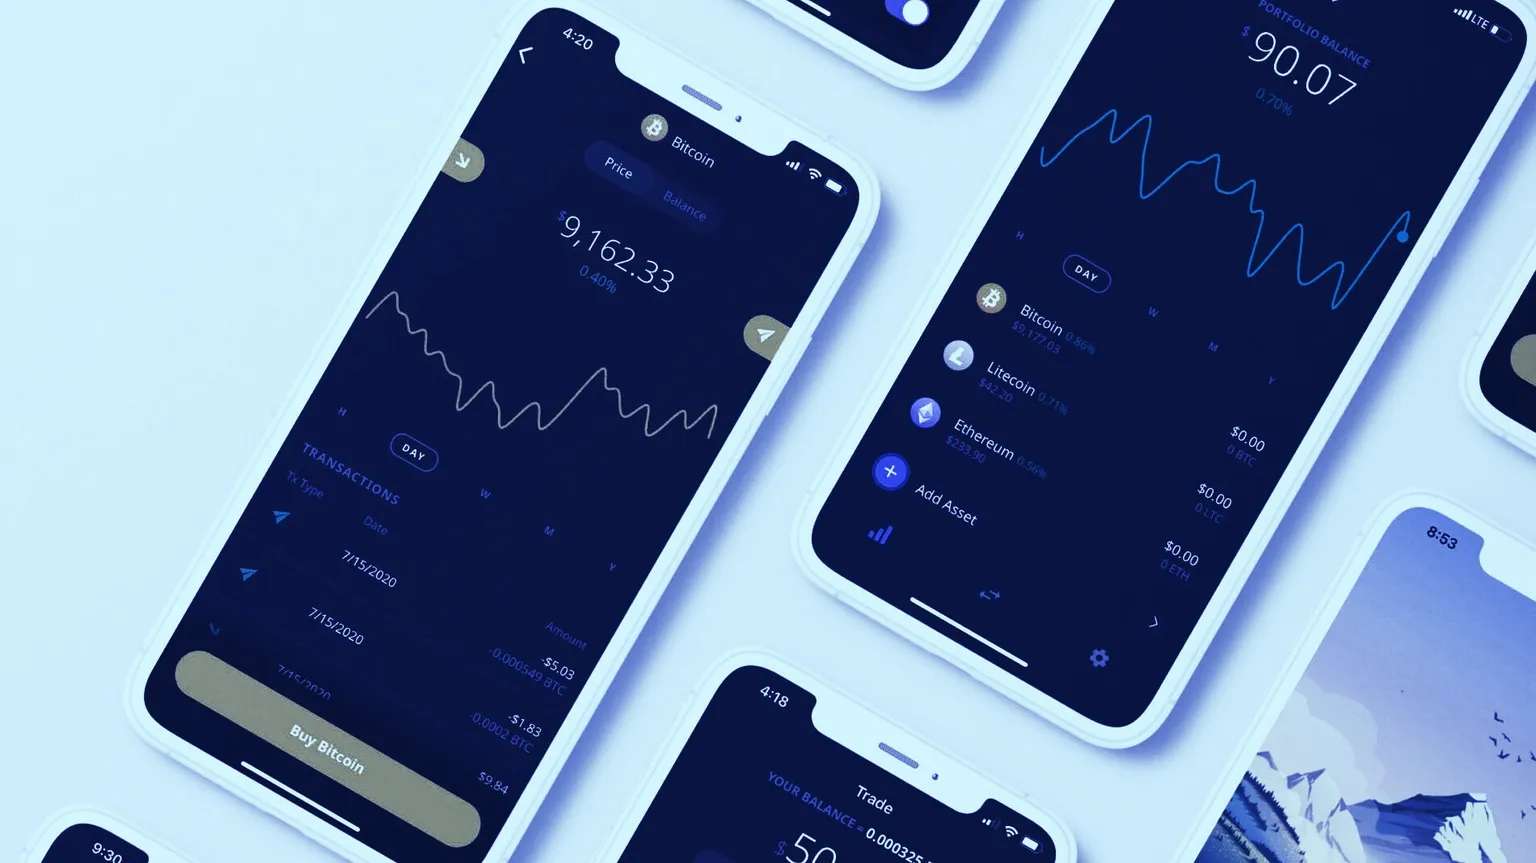 ShapeShift has launched a mobile trading app (Source: ShapeShift)